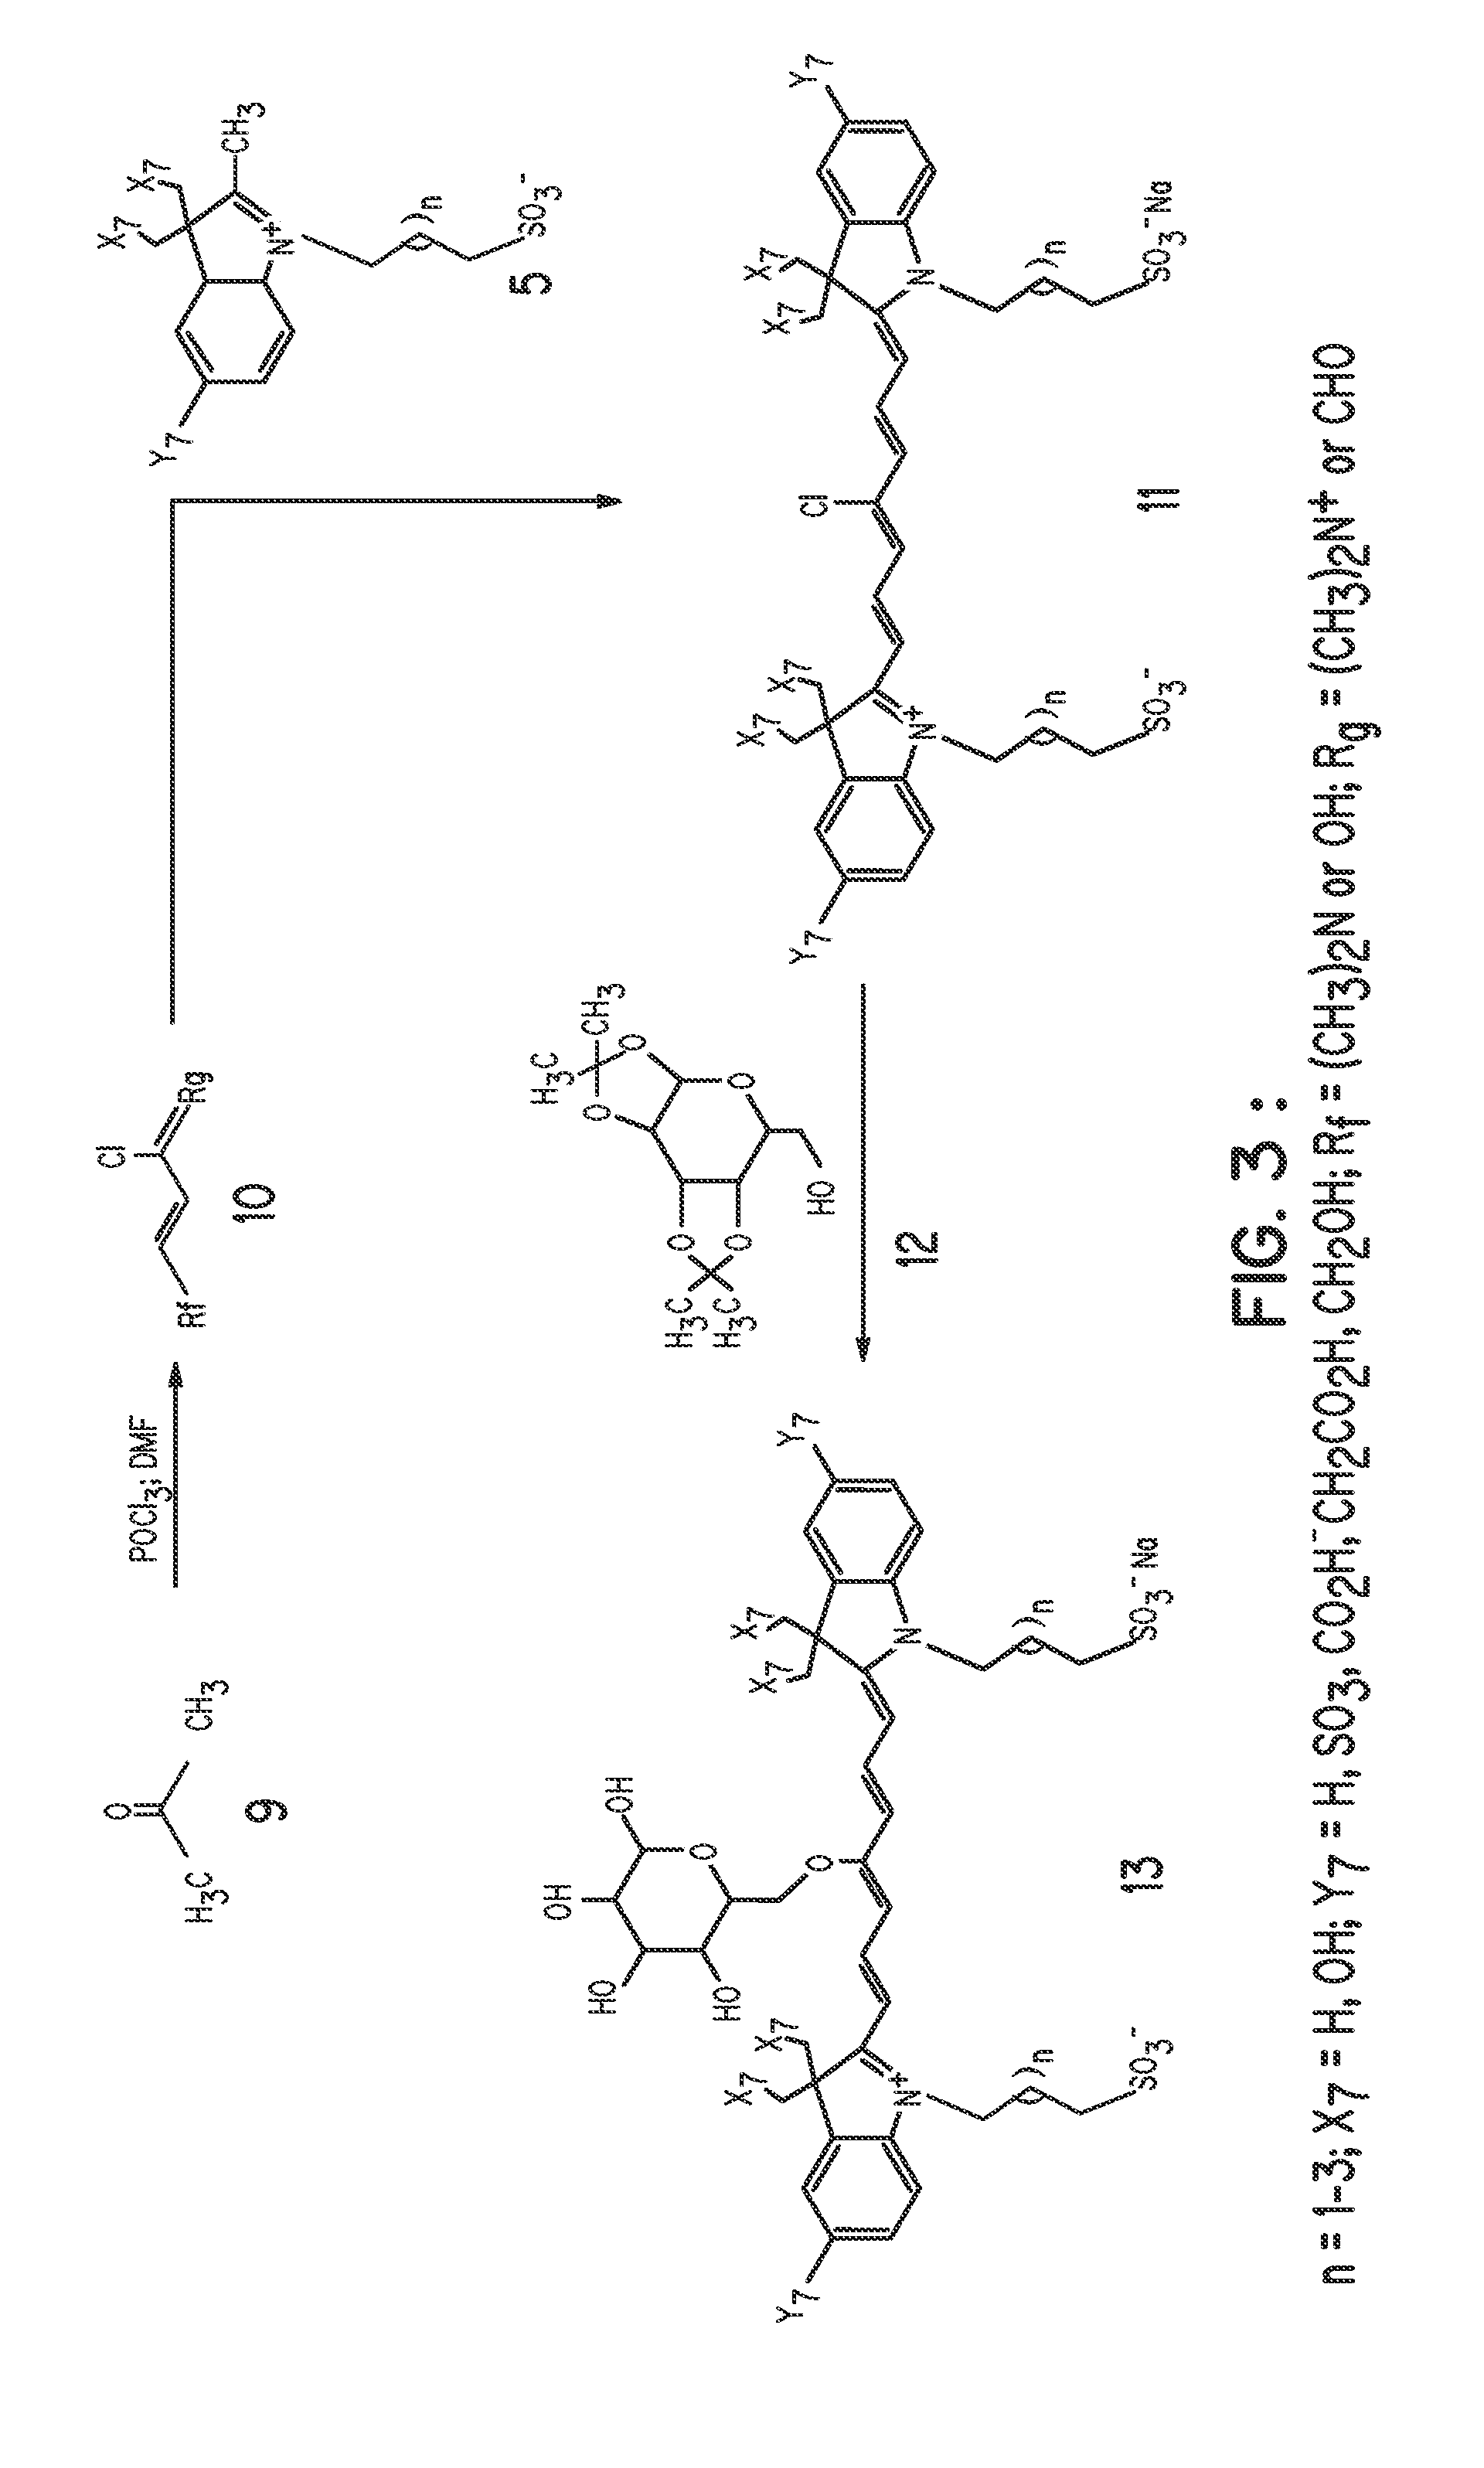 Tissue-specific exogenous optical agents